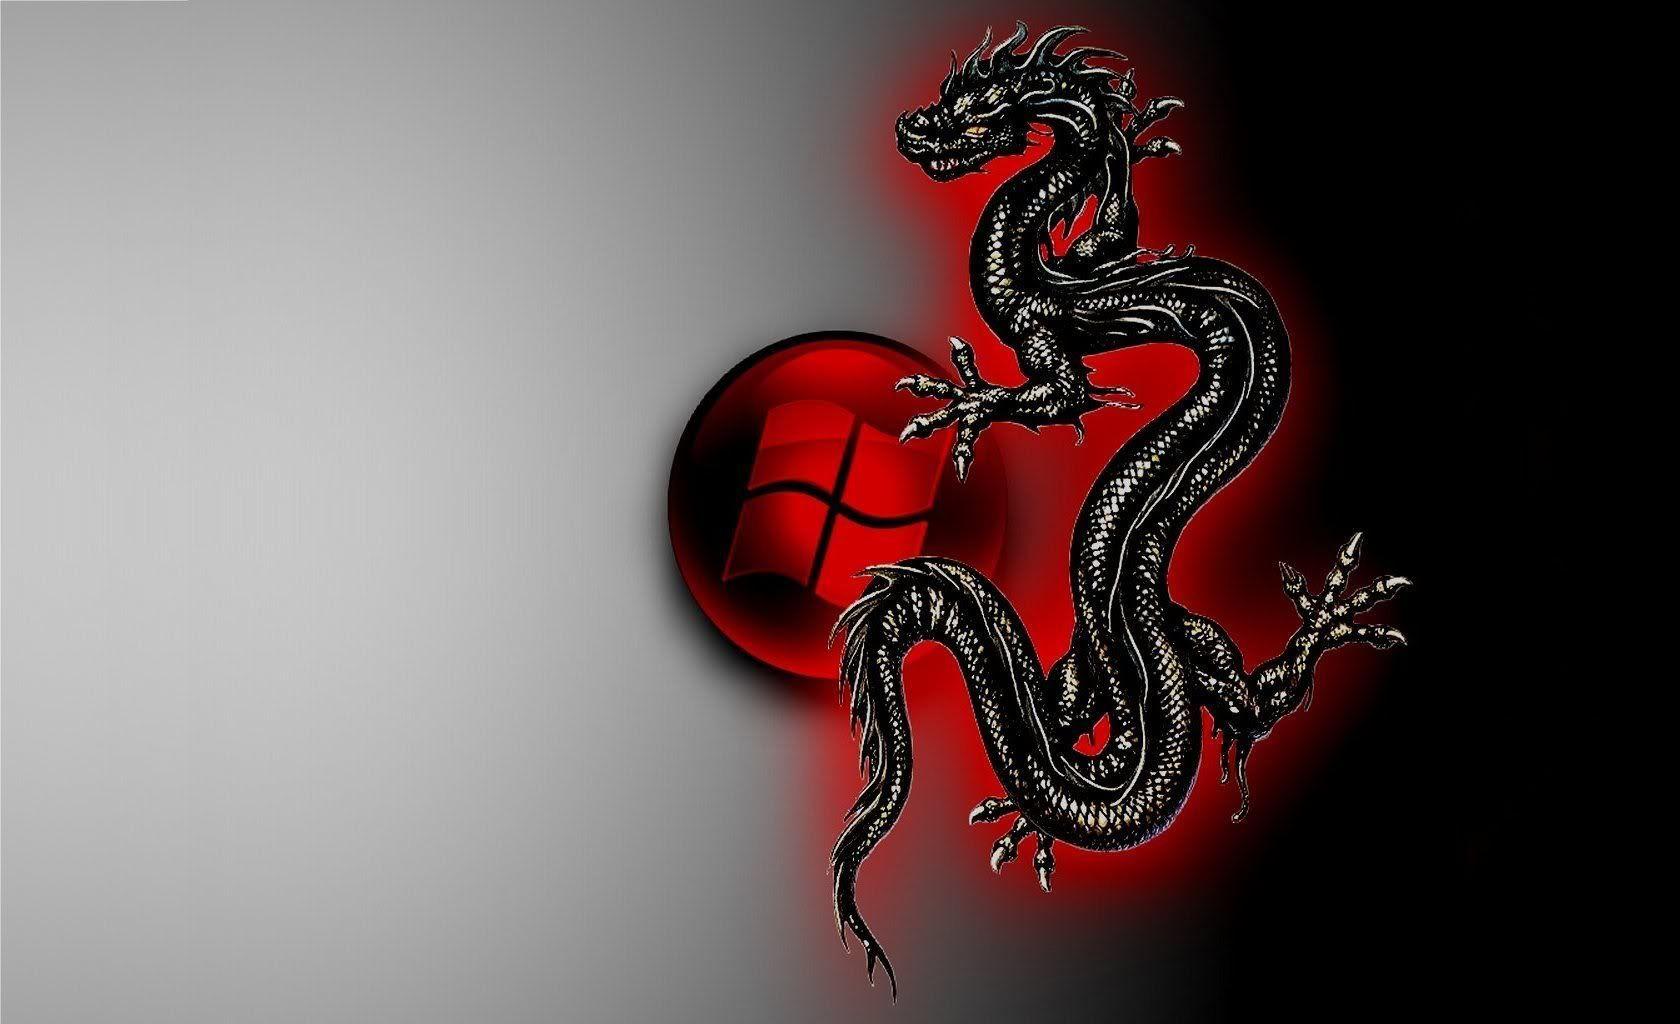 Red Dragons wallpaper. Red Dragons background